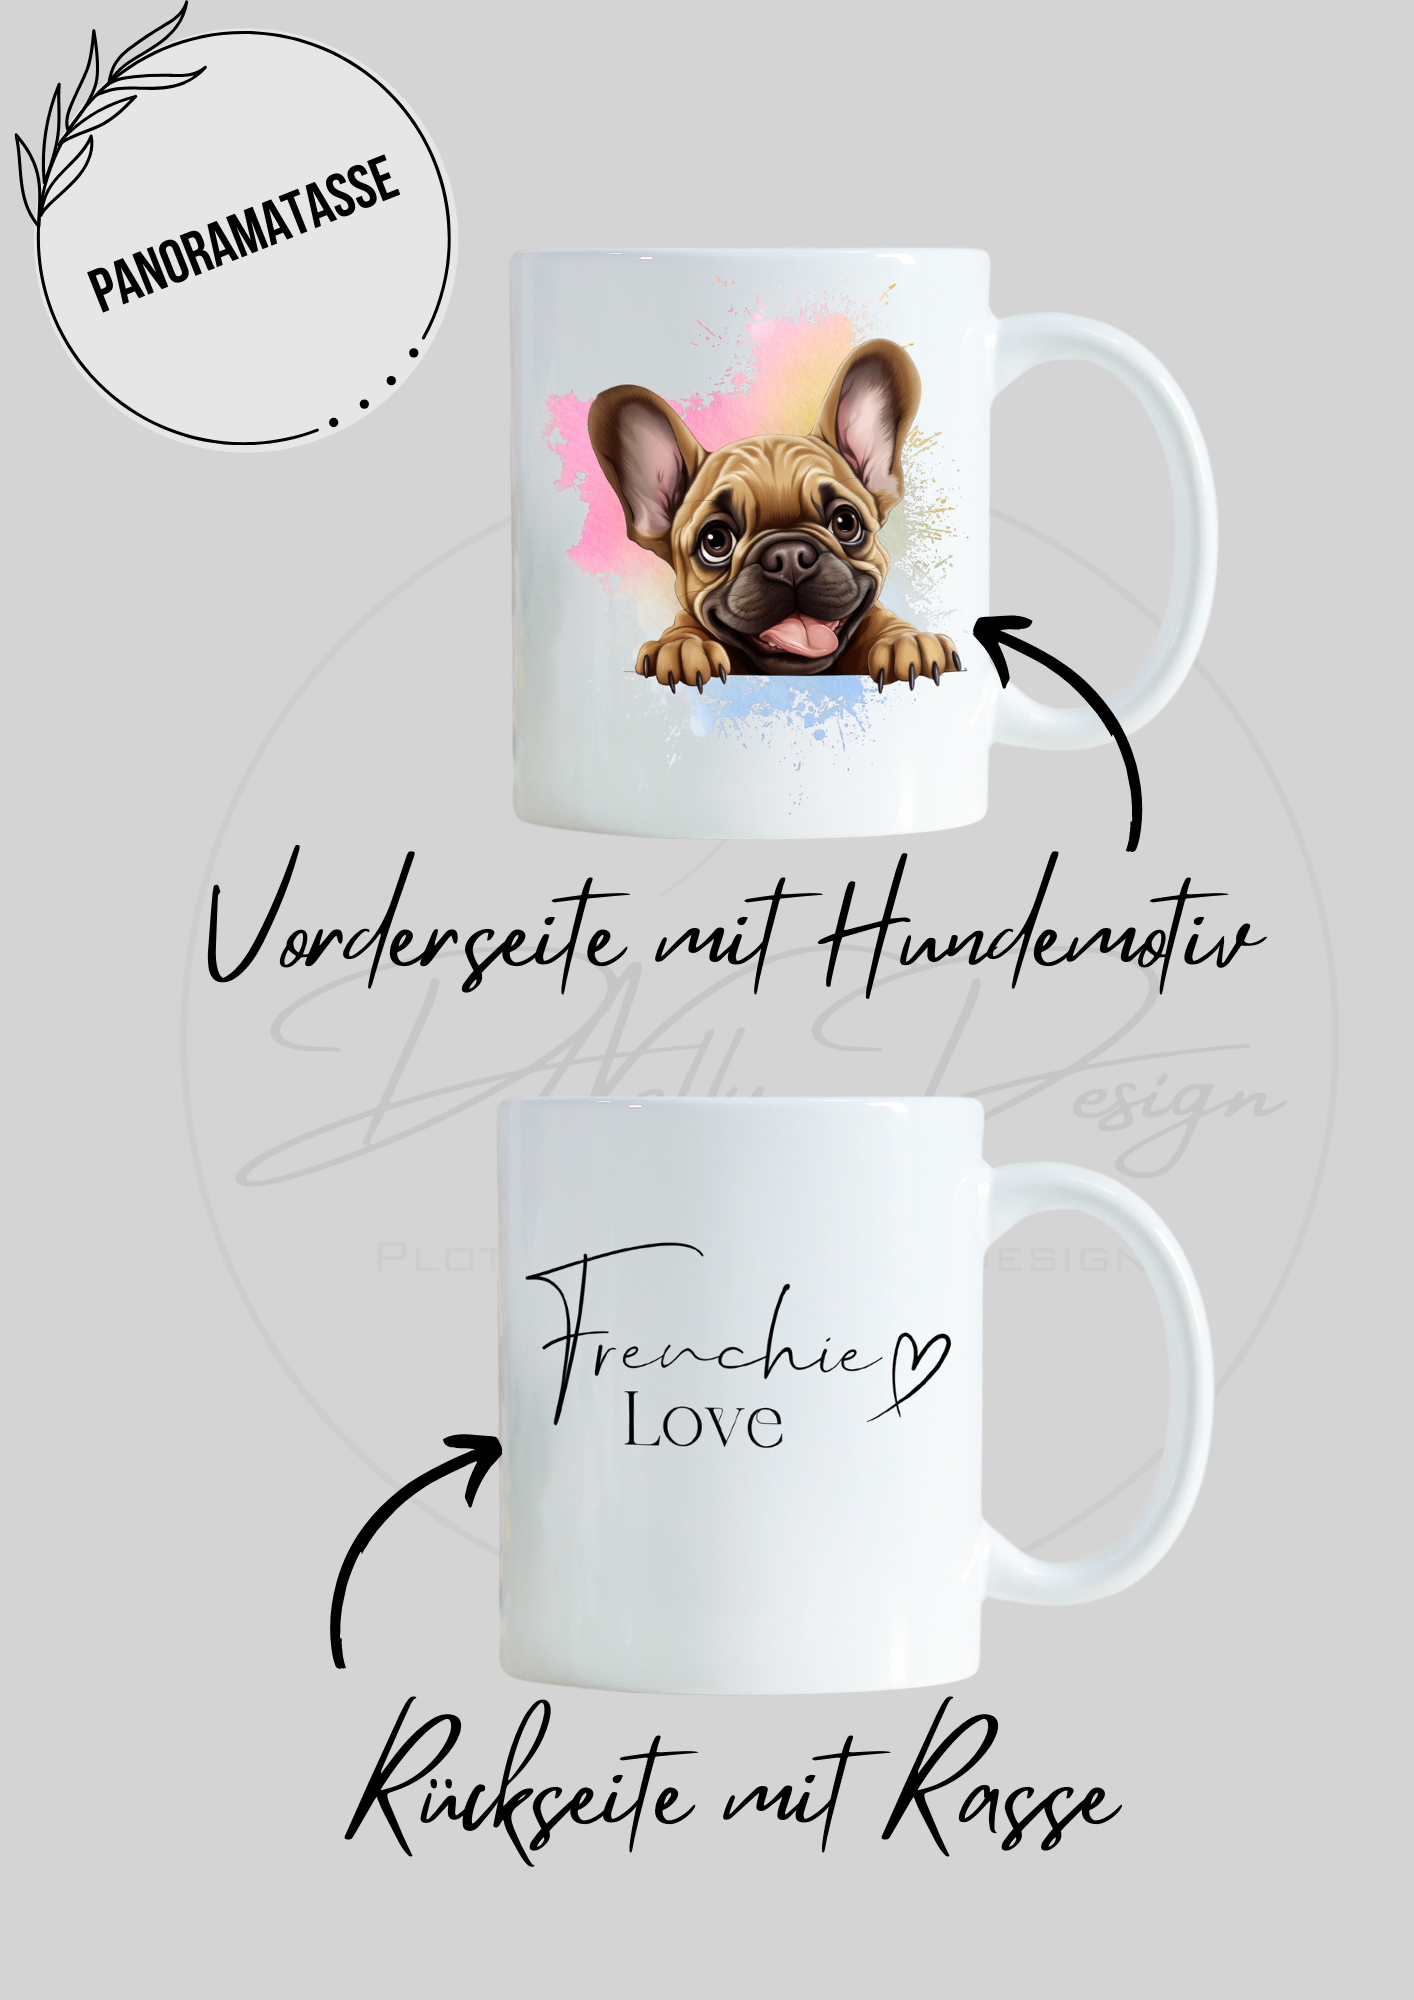 Cup favorite person personalized with name/gift for girlfriend/gift idea/gift favorite person